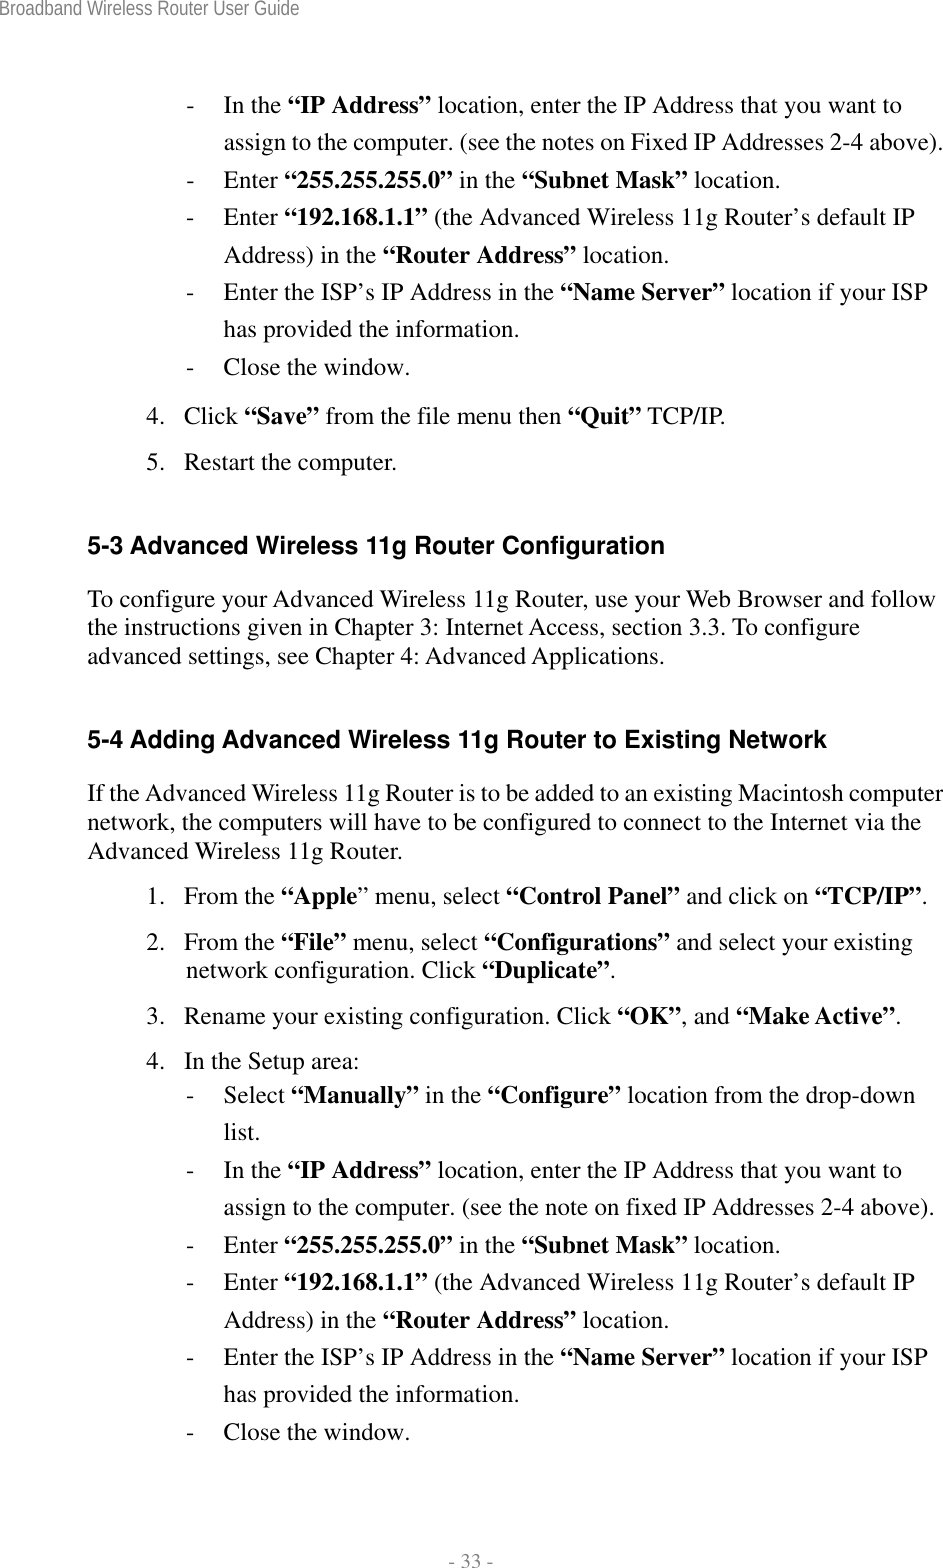 Broadband Wireless Router User Guide  - 33 - - In the “IP Address” location, enter the IP Address that you want to assign to the computer. (see the notes on Fixed IP Addresses 2-4 above). - Enter “255.255.255.0” in the “Subnet Mask” location. - Enter “192.168.1.1” (the Advanced Wireless 11g Router’s default IP Address) in the “Router Address” location. -  Enter the ISP’s IP Address in the “Name Server” location if your ISP has provided the information. -  Close the window. 4. Click “Save” from the file menu then “Quit” TCP/IP. 5. Restart the computer.  5-3 Advanced Wireless 11g Router Configuration To configure your Advanced Wireless 11g Router, use your Web Browser and follow the instructions given in Chapter 3: Internet Access, section 3.3. To configure advanced settings, see Chapter 4: Advanced Applications.  5-4 Adding Advanced Wireless 11g Router to Existing Network If the Advanced Wireless 11g Router is to be added to an existing Macintosh computer network, the computers will have to be configured to connect to the Internet via the Advanced Wireless 11g Router. 1. From the “Apple” menu, select “Control Panel” and click on “TCP/IP”.  2. From the “File” menu, select “Configurations” and select your existing network configuration. Click “Duplicate”. 3.  Rename your existing configuration. Click “OK”, and “Make Active”. 4.  In the Setup area: - Select “Manually” in the “Configure” location from the drop-down list. - In the “IP Address” location, enter the IP Address that you want to assign to the computer. (see the note on fixed IP Addresses 2-4 above). - Enter “255.255.255.0” in the “Subnet Mask” location. - Enter “192.168.1.1” (the Advanced Wireless 11g Router’s default IP Address) in the “Router Address” location. -  Enter the ISP’s IP Address in the “Name Server” location if your ISP has provided the information. -  Close the window. 